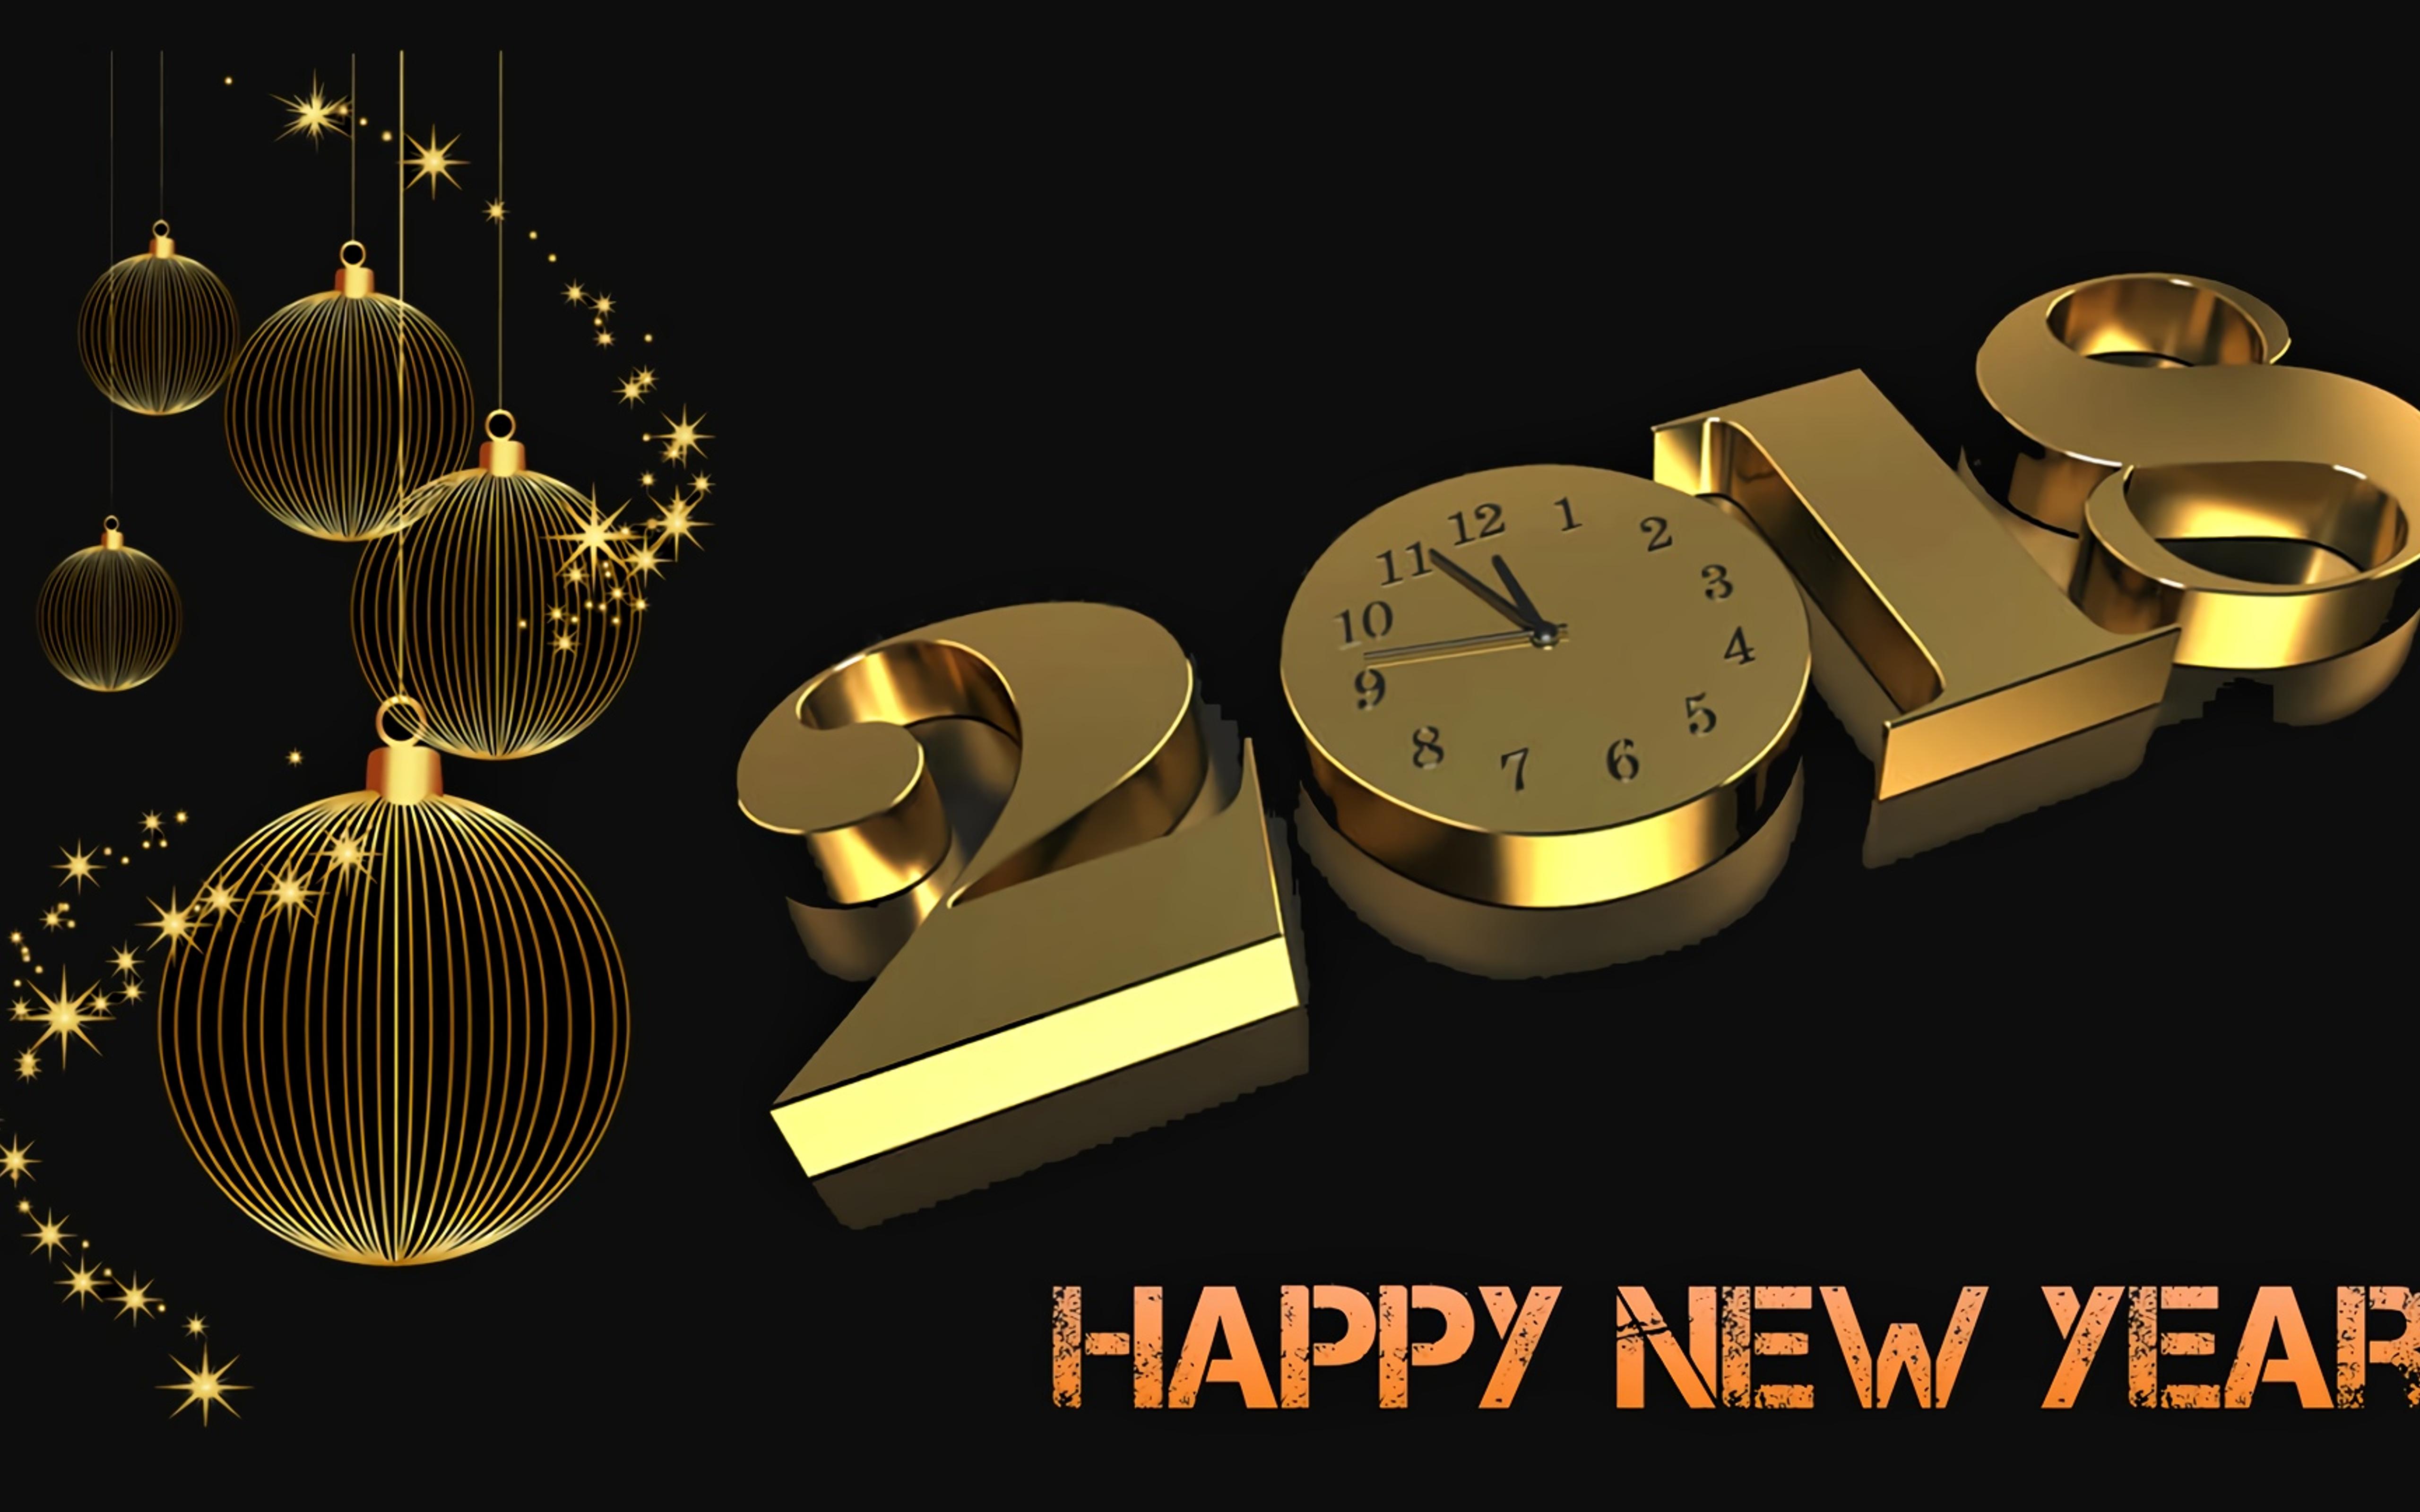 Golden time and a Happy New Year 2018 - HD wallpaper